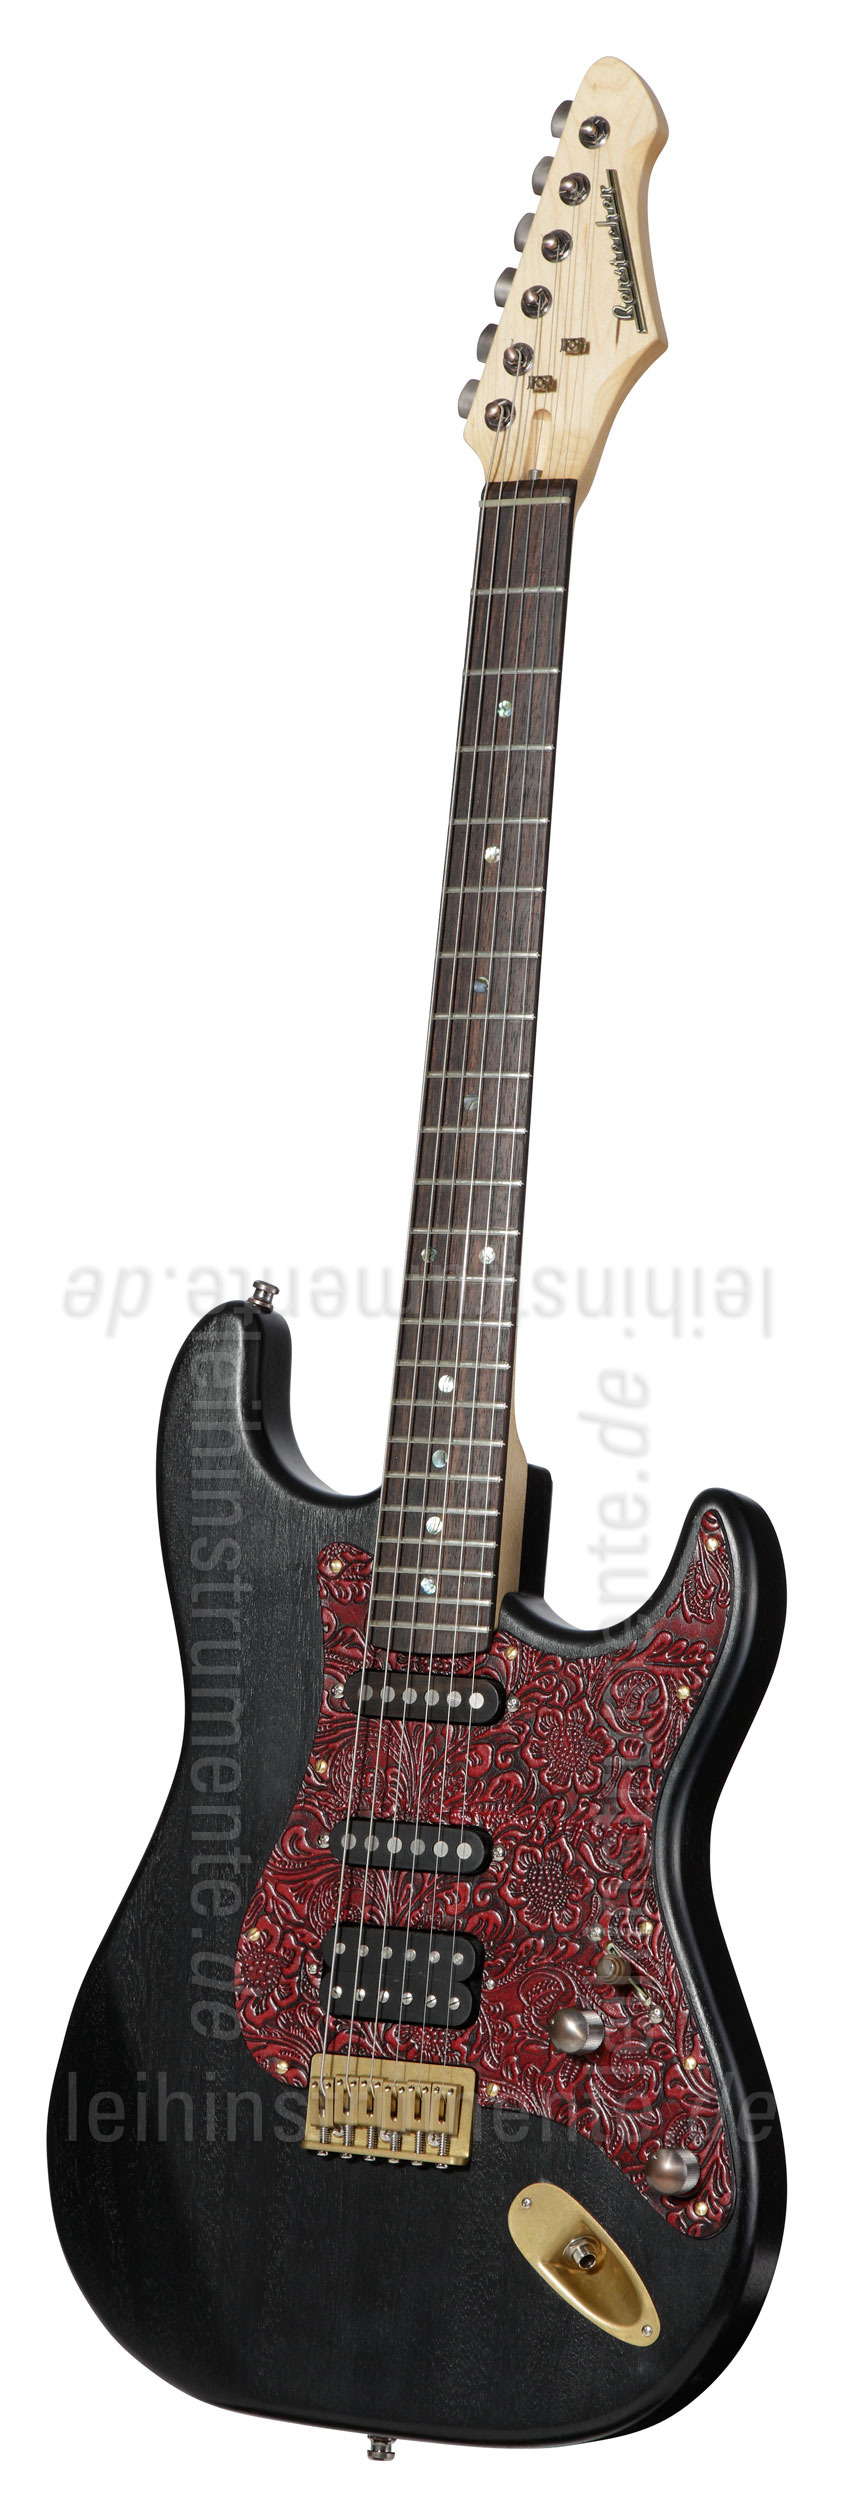 to article description / price Electric Guitar BERSTECHER Dark Chocolate & Chili Deluxe 2016 + hard case - made in Germany